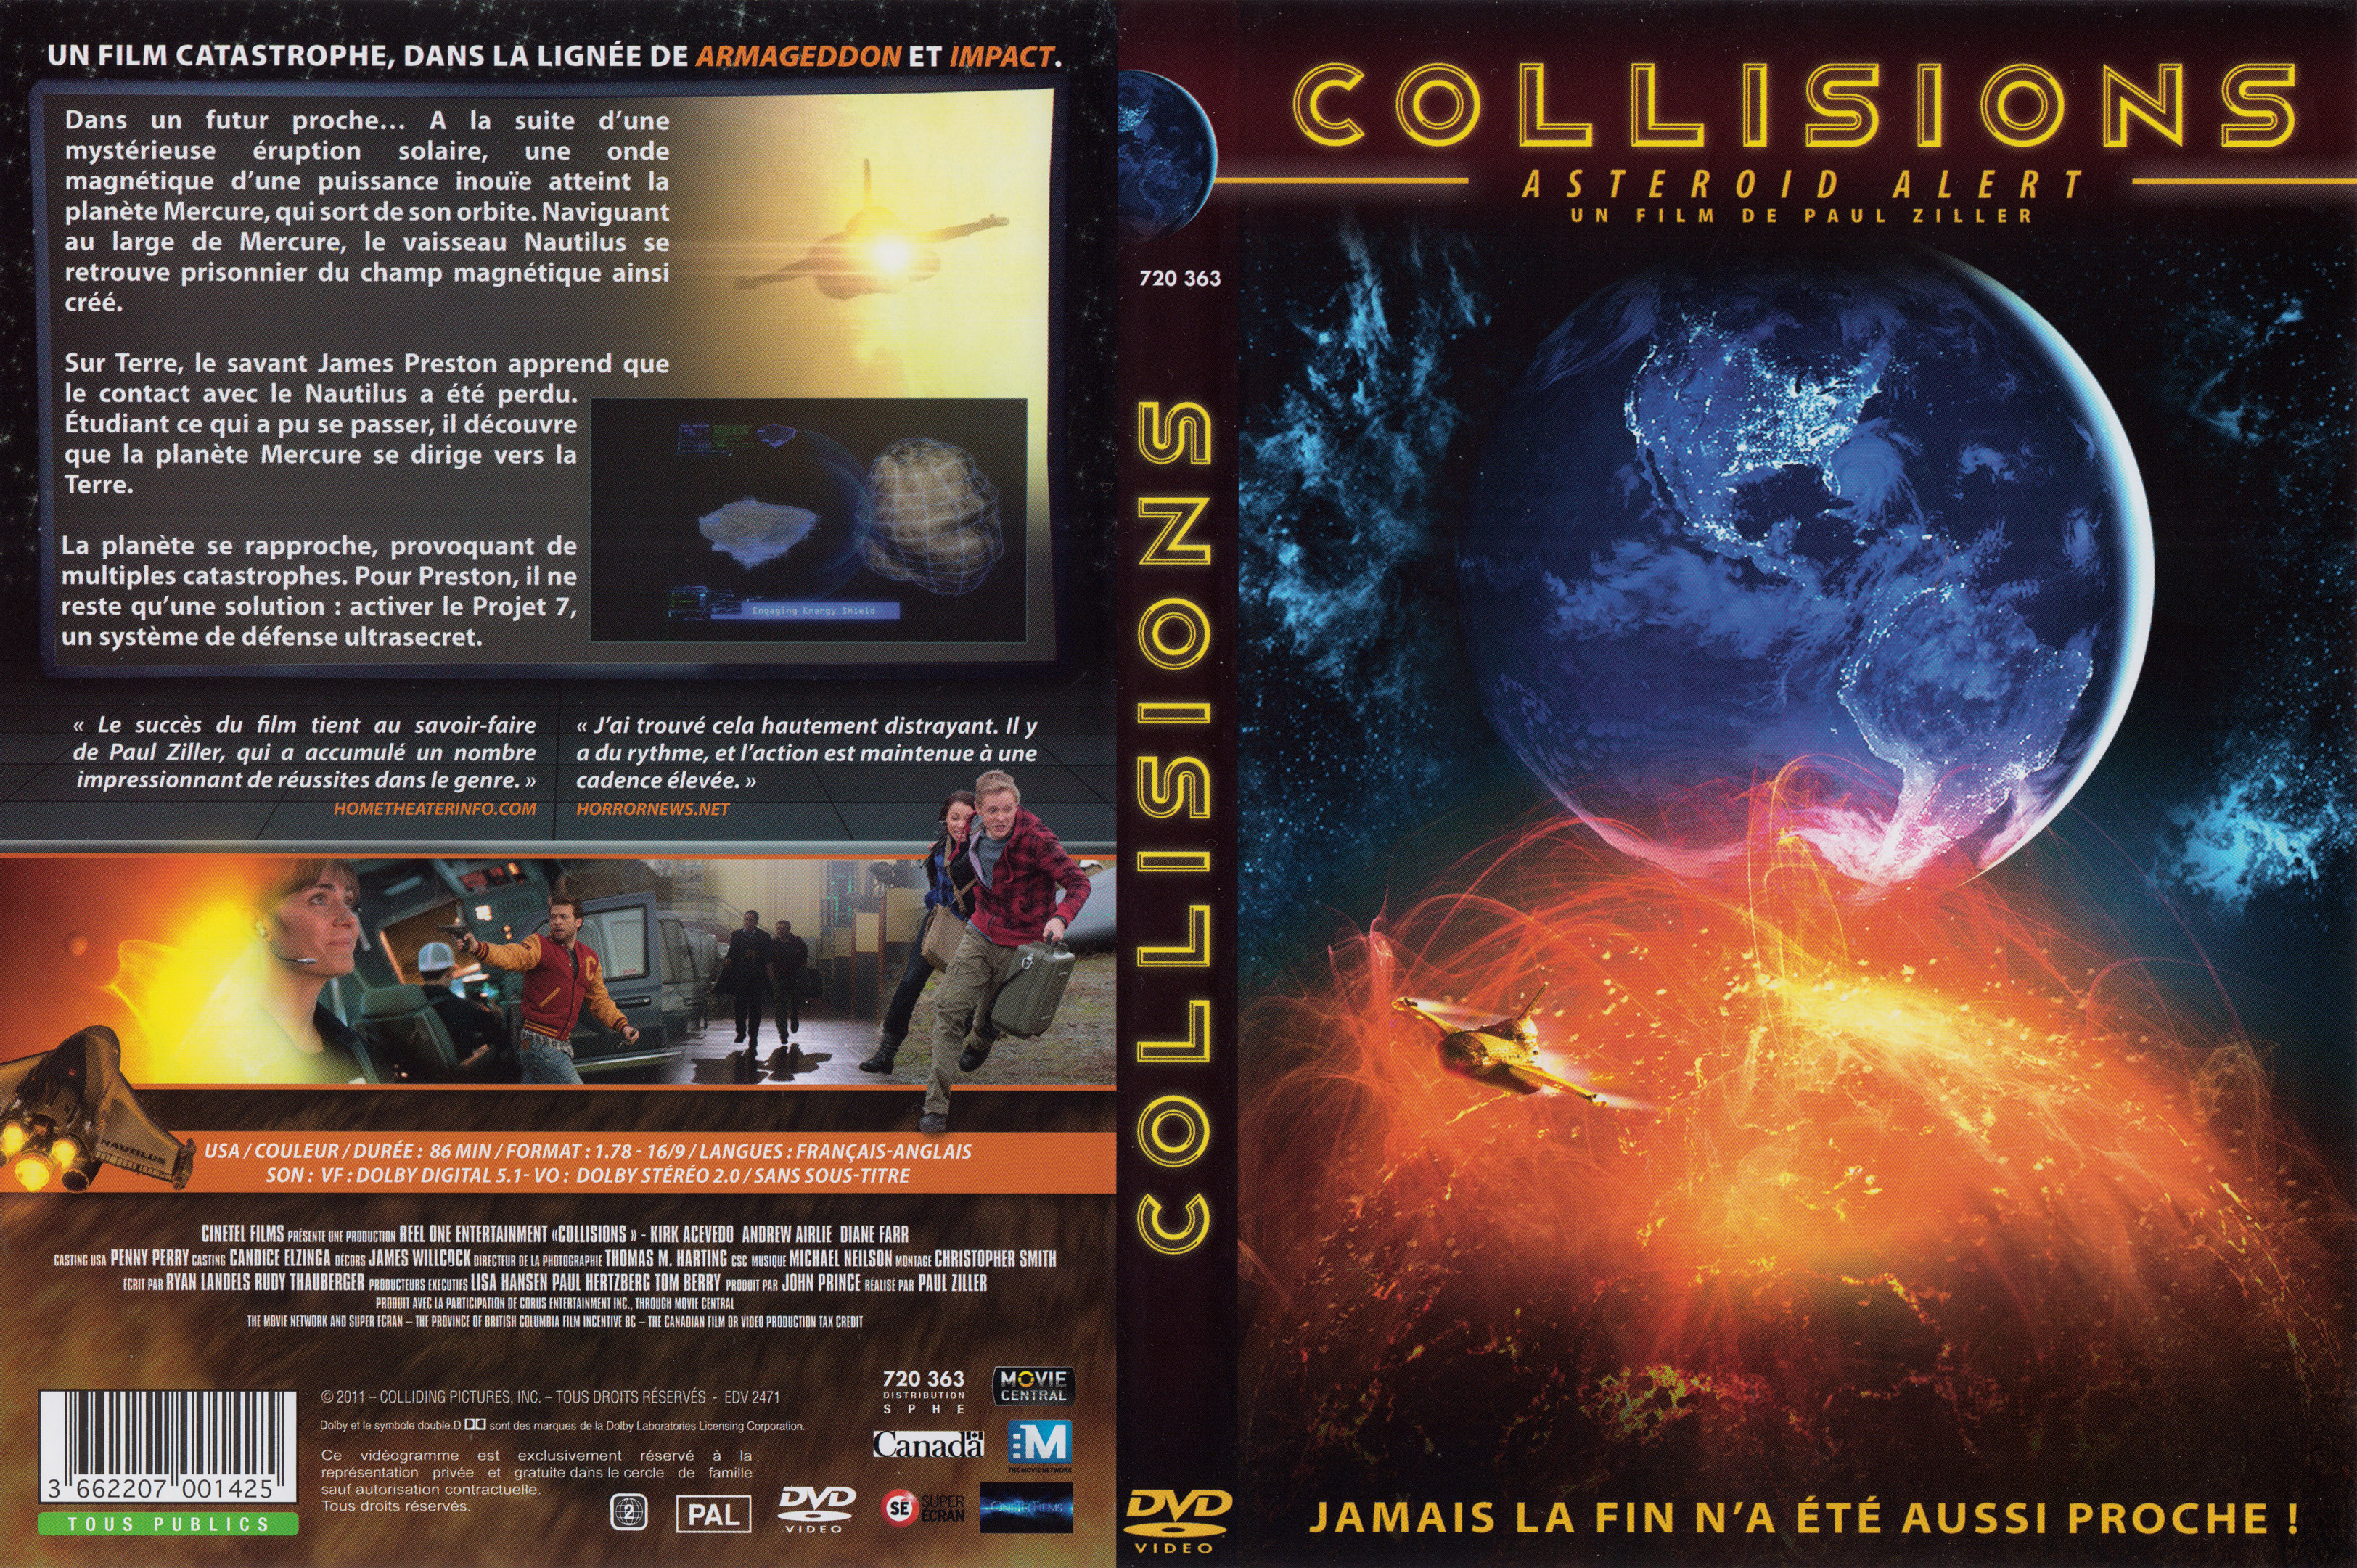 Jaquette DVD Collisions